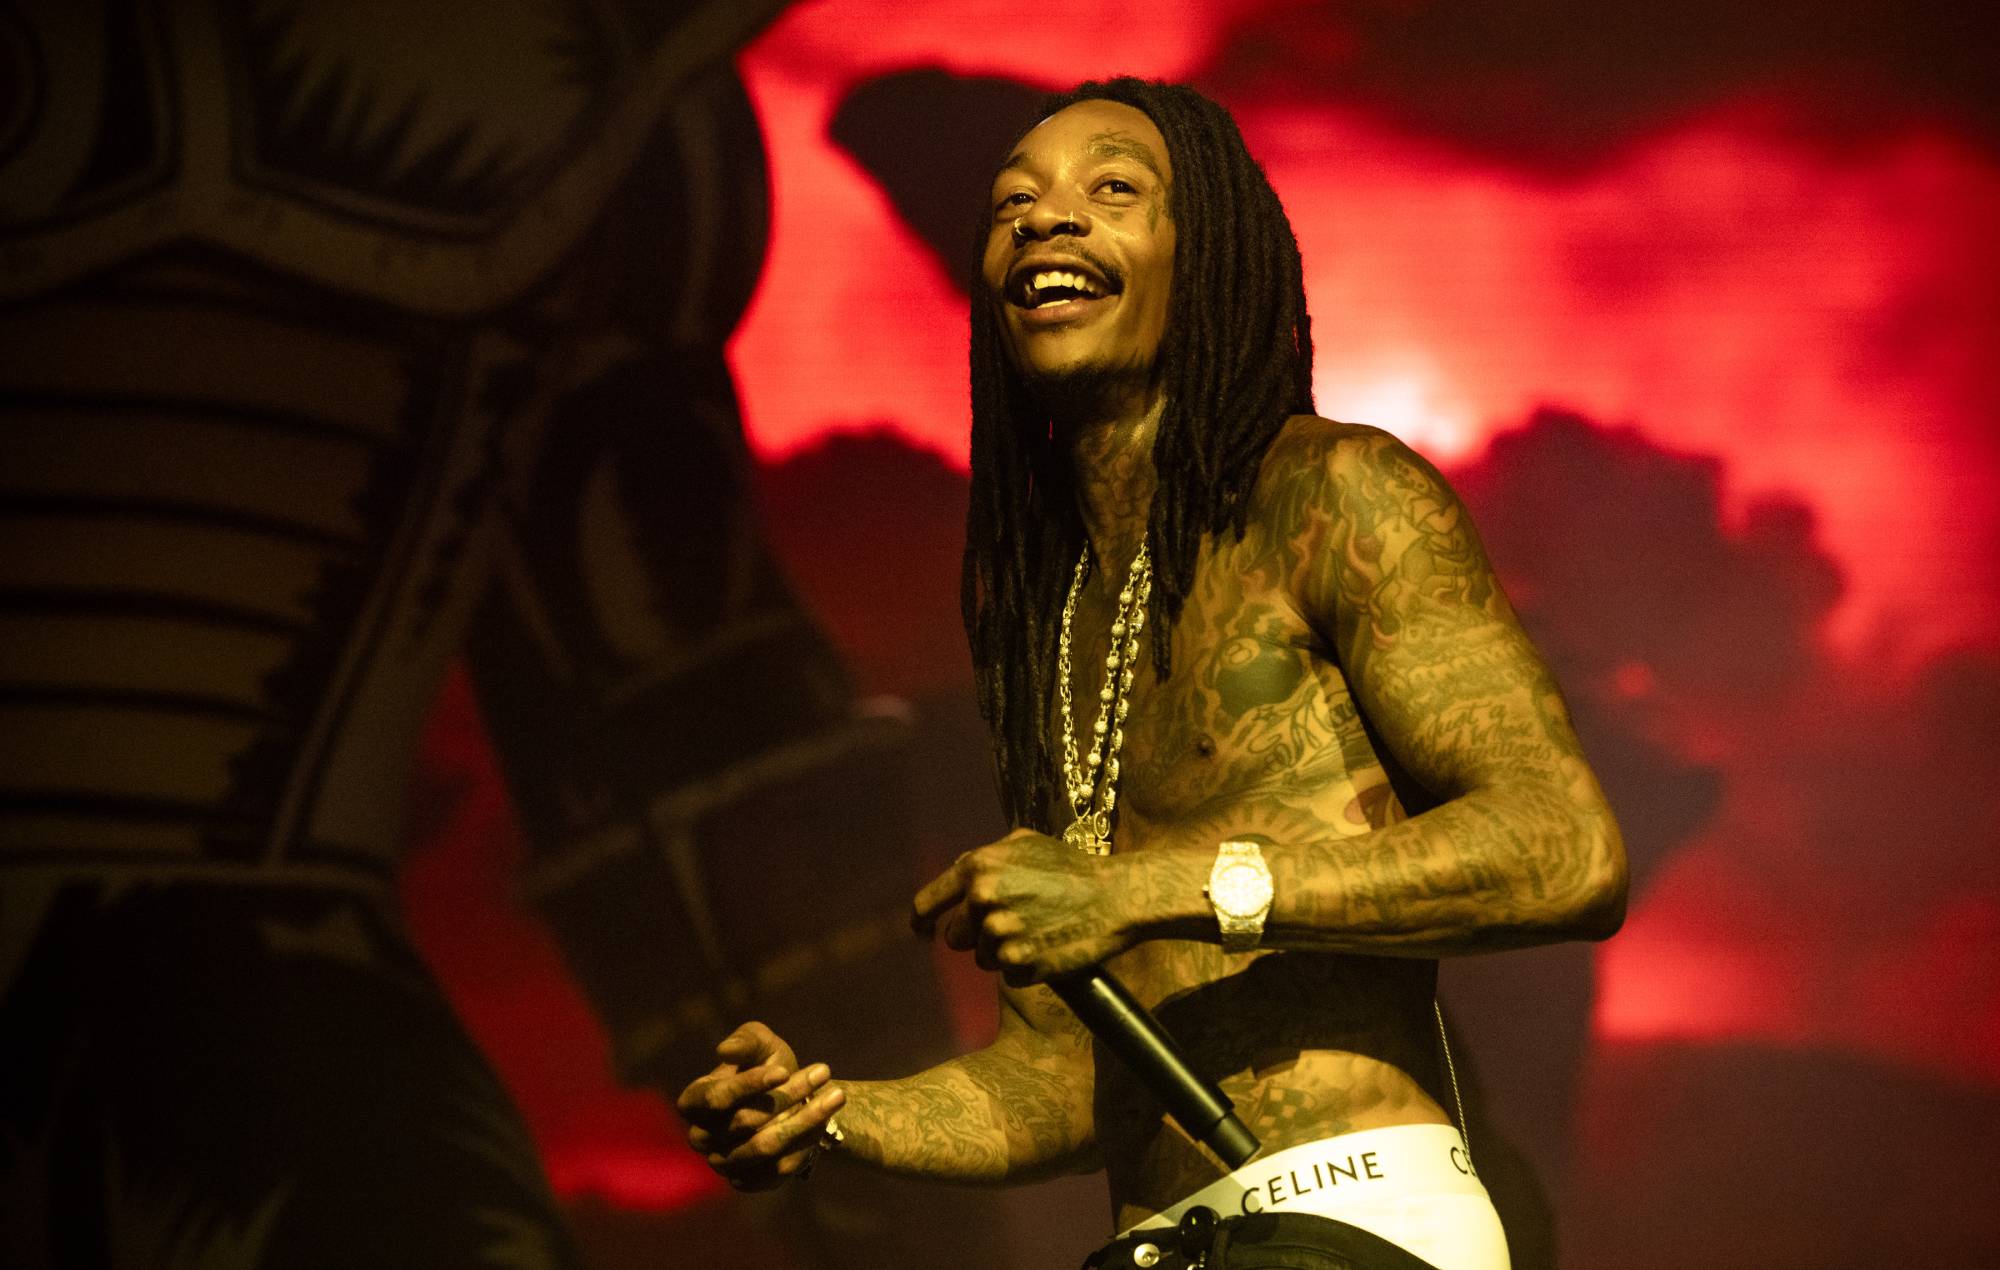 Wiz Khalifa arrested and charged after smoking weed on stage in Romania